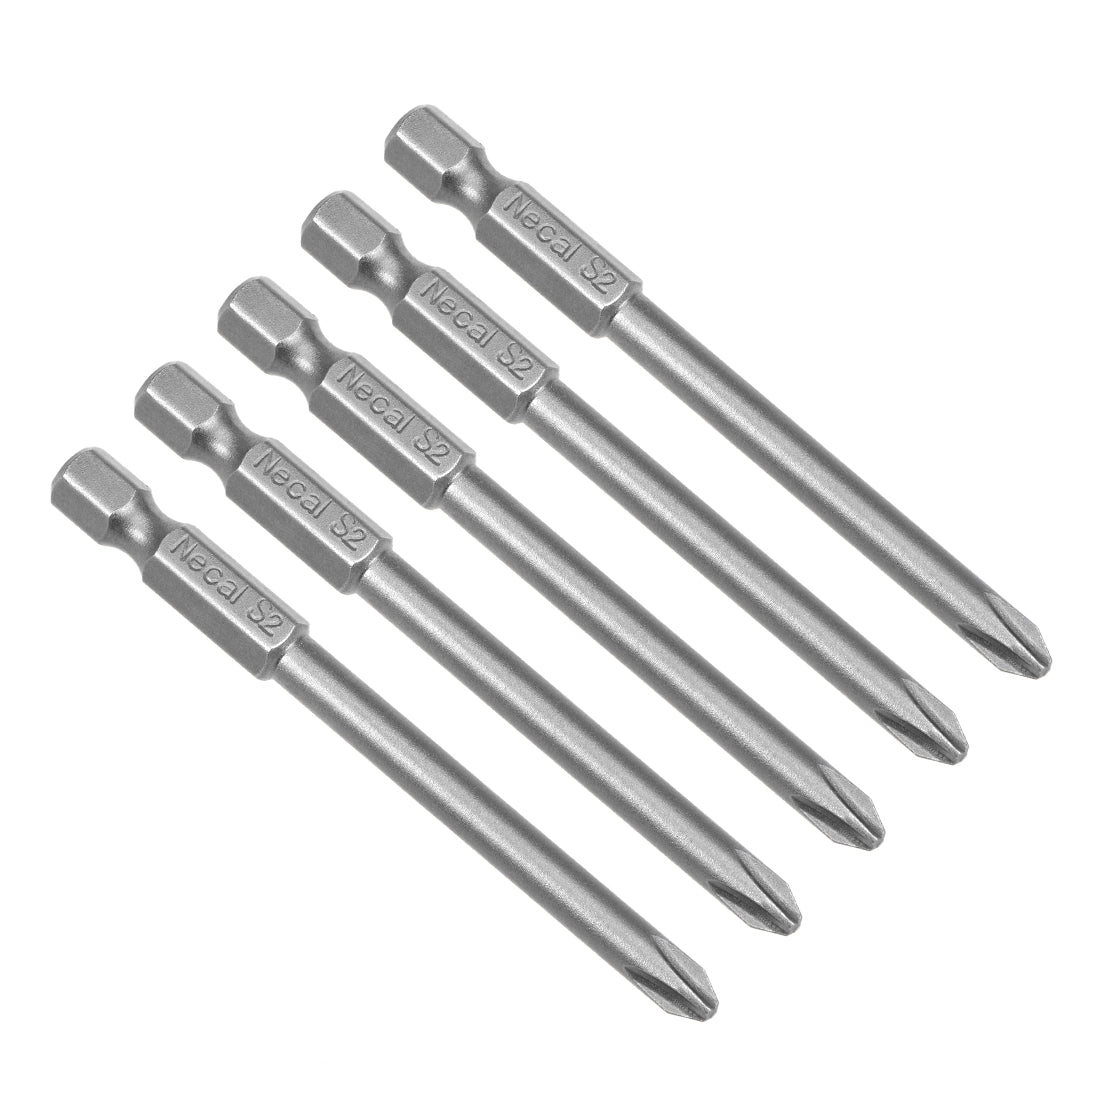 uxcell Uxcell 5 Pcs Magnetic Phillips Screwdriver Bits, Hex Shank S2 Steel Power Tool